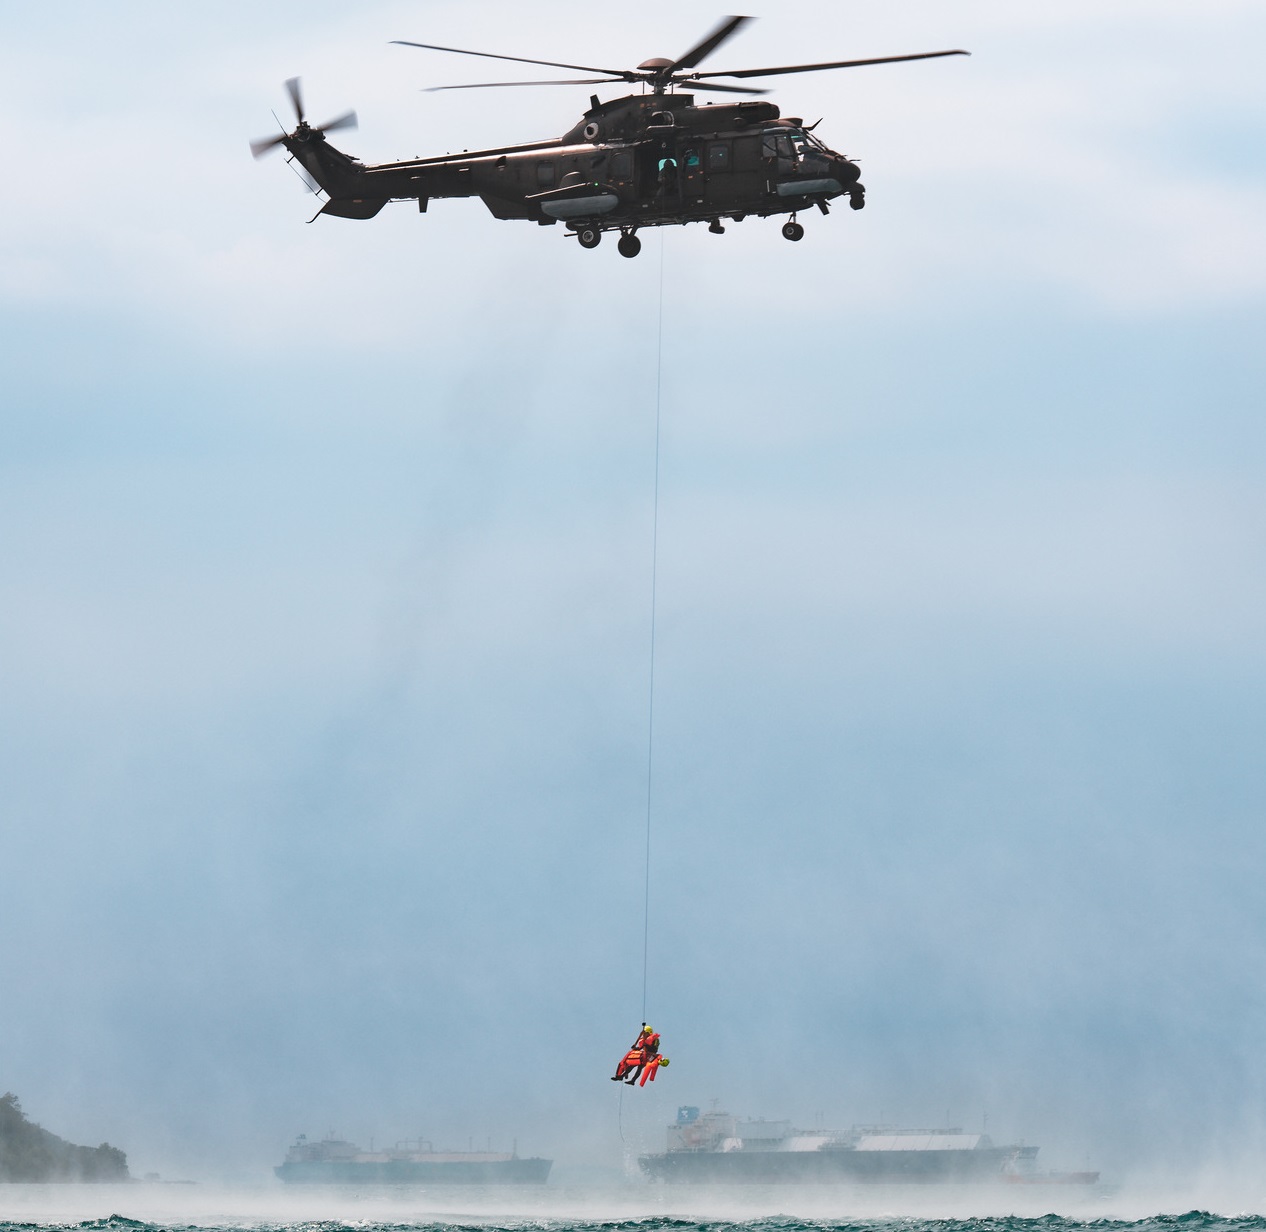 A simulated casualty being winched up to the RSAF's H225M helicopter in an aerial mishap scenario.